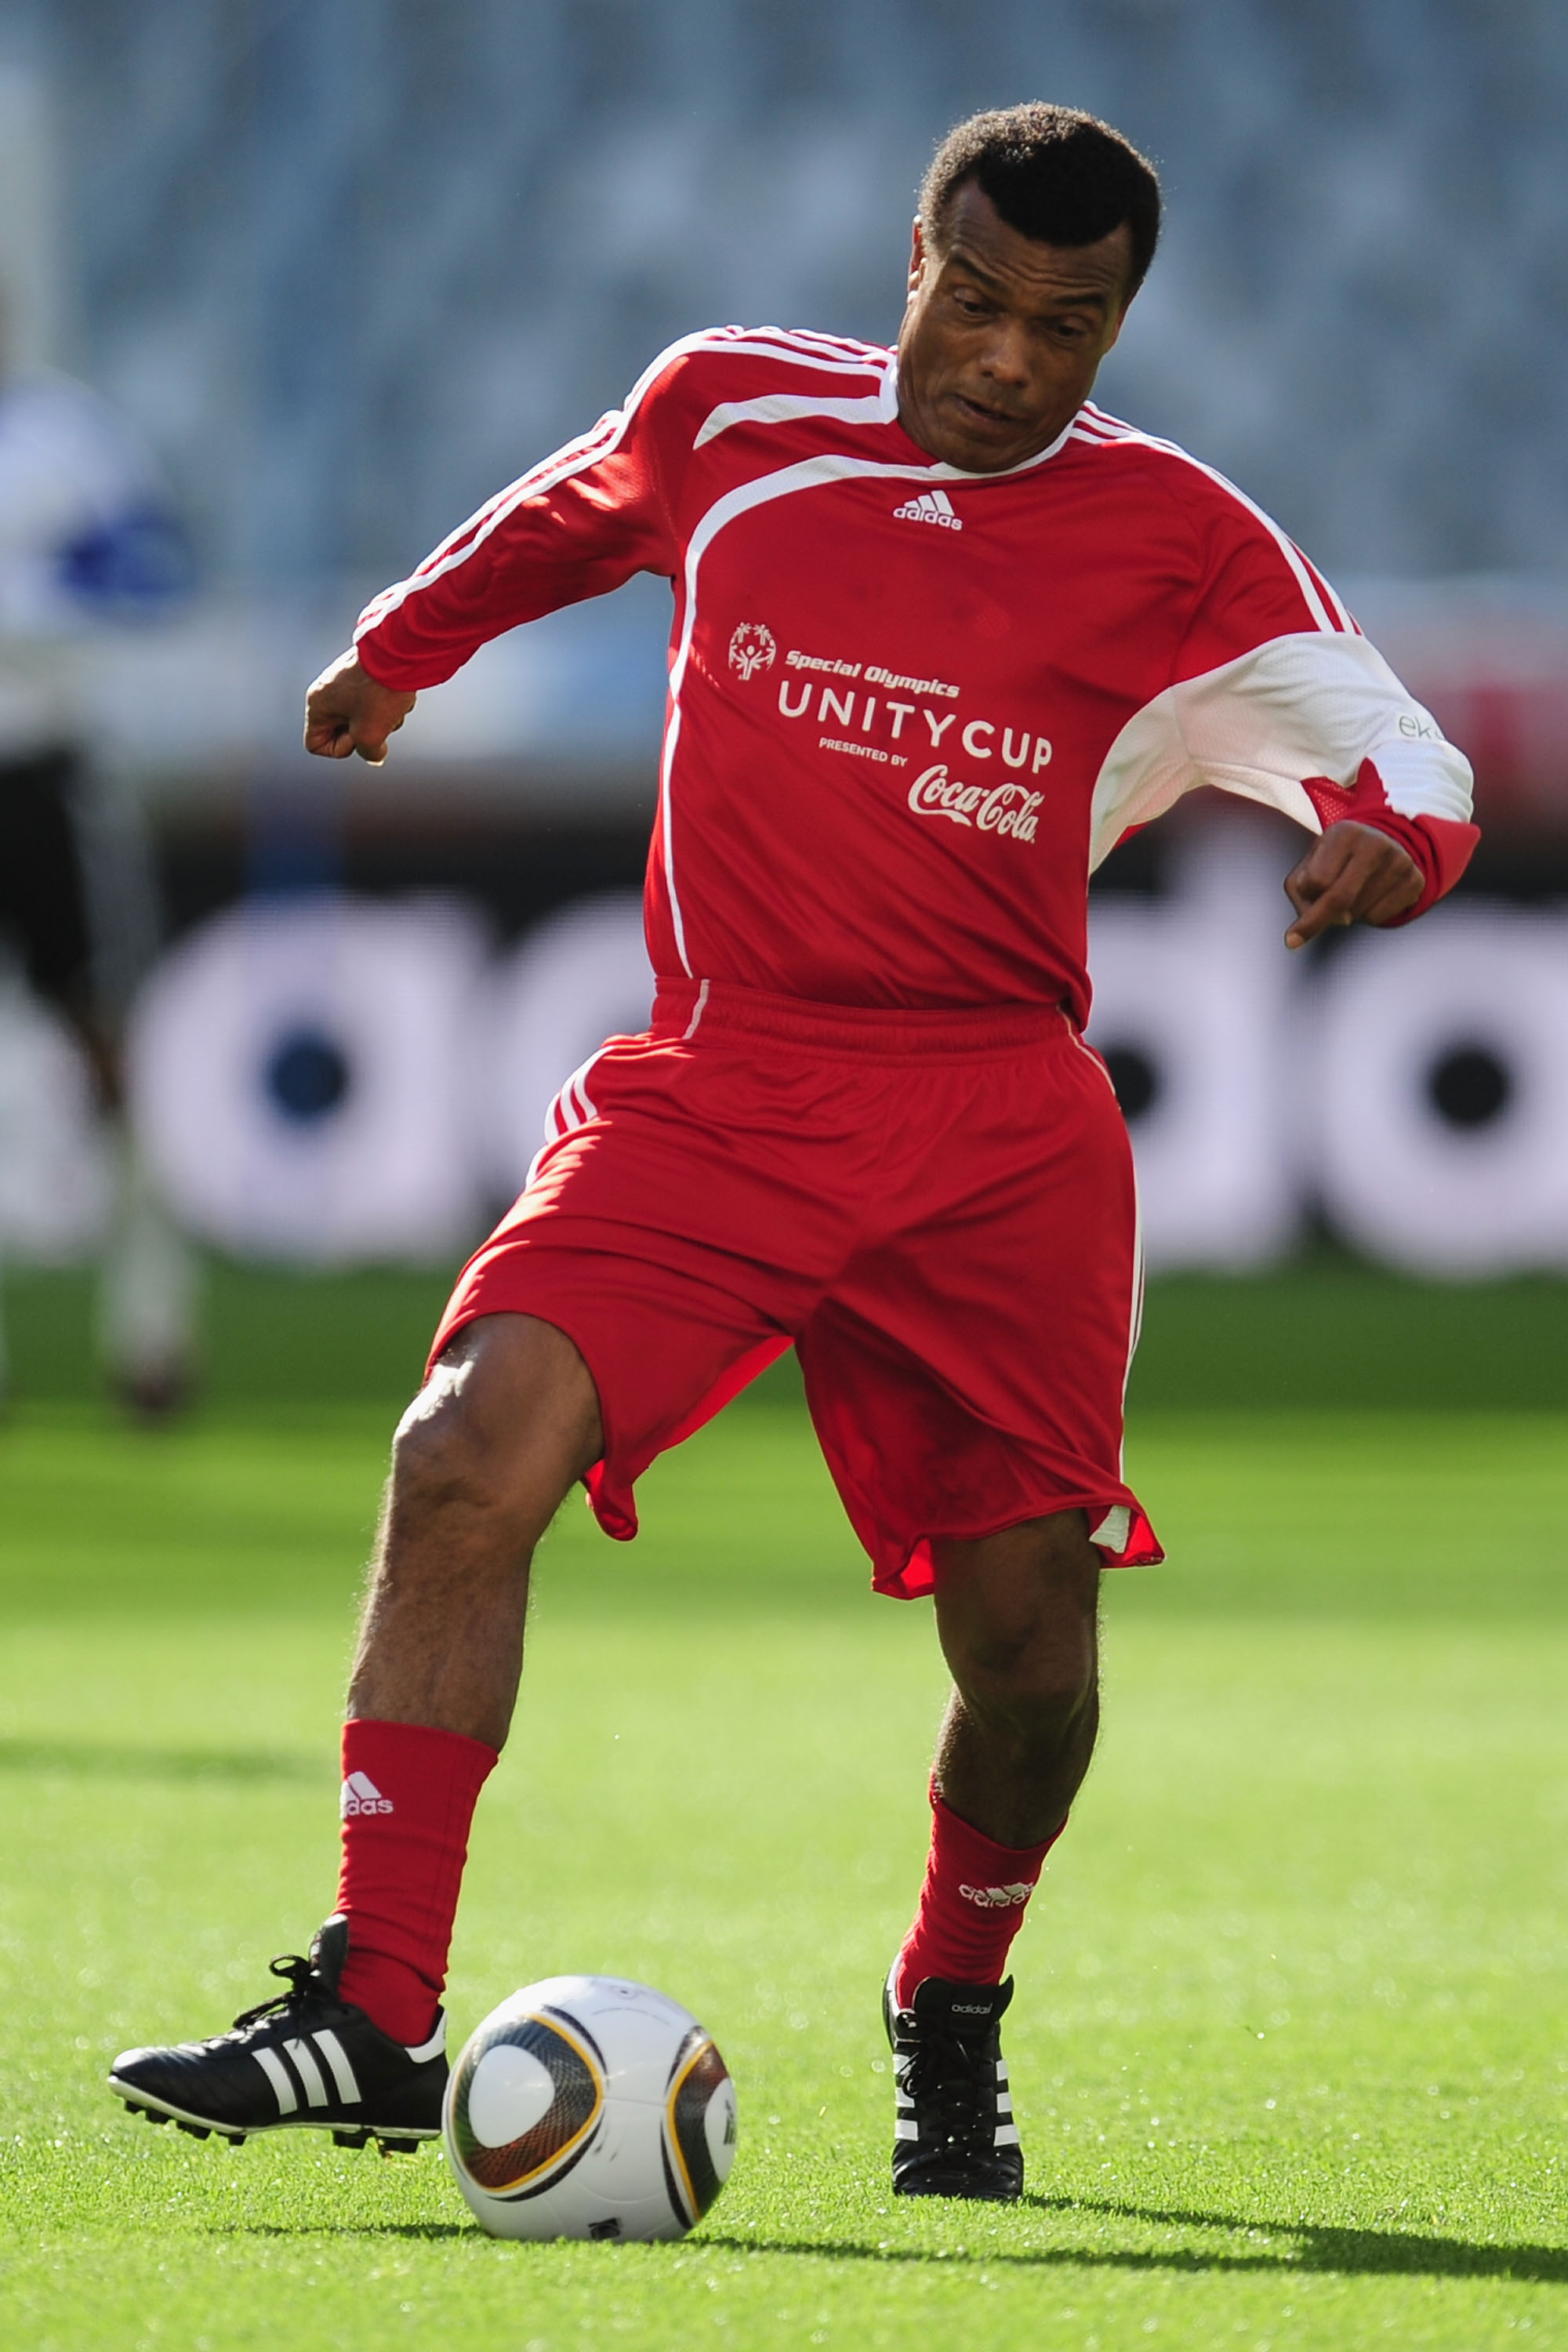 CAPE TOWN, SOUTH AFRICA - JULY 03:  Former Peru International Teofilo Cubillas in action during a Charity Match ahead of the 2010 FIFA World Cup South Africa Quarter Final match between Argentina and Germany at Green Point Stadium on July 3, 2010 in Cape